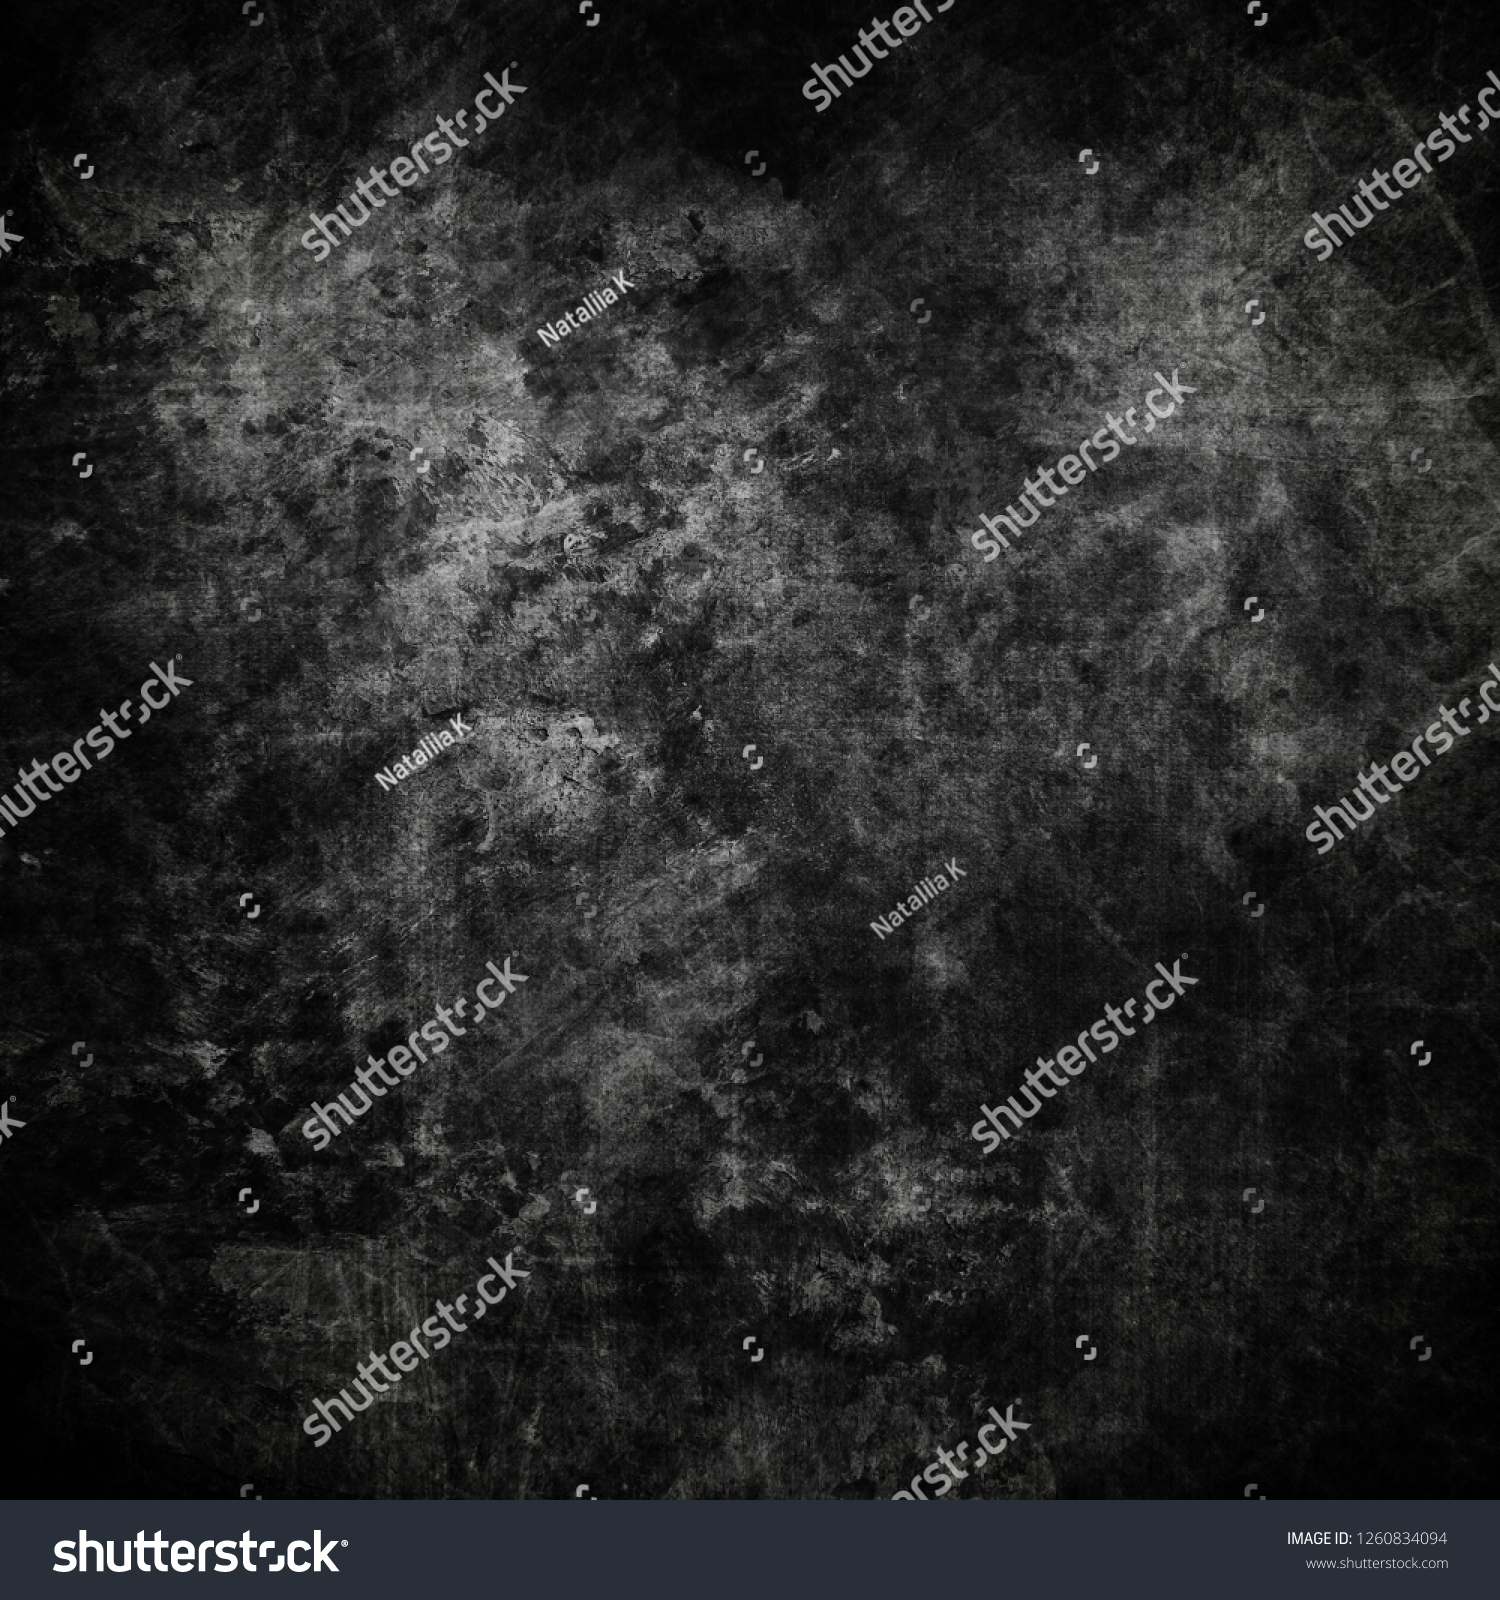 grunge background with space for text or image #1260834094